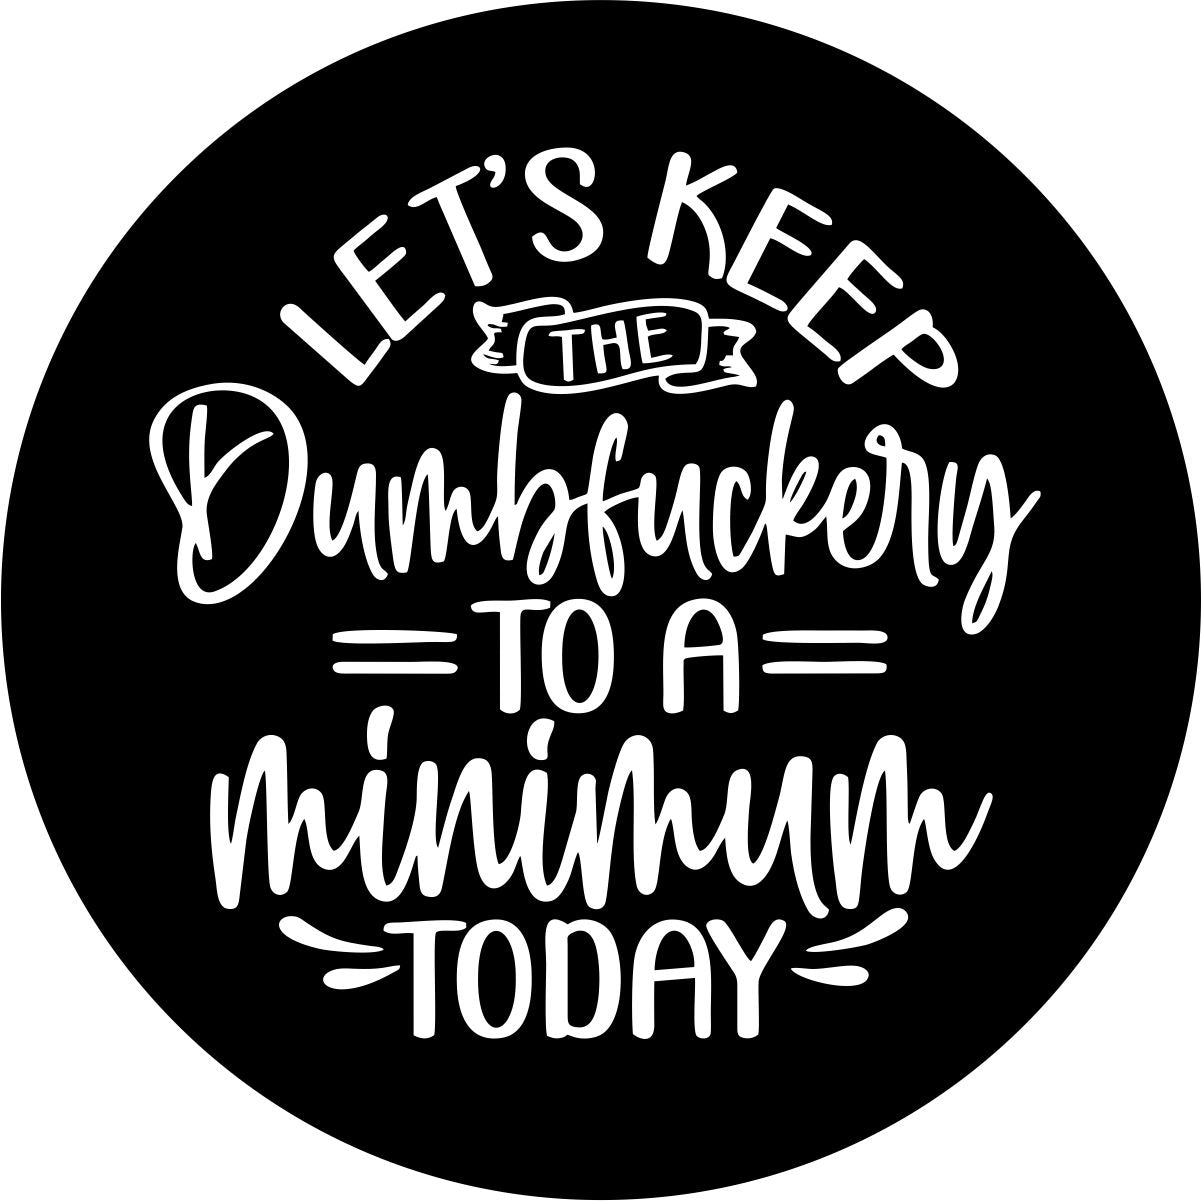 Simple and funny spare tire cover design of the saying "let's keep the dumbfuckery to a minimum today"